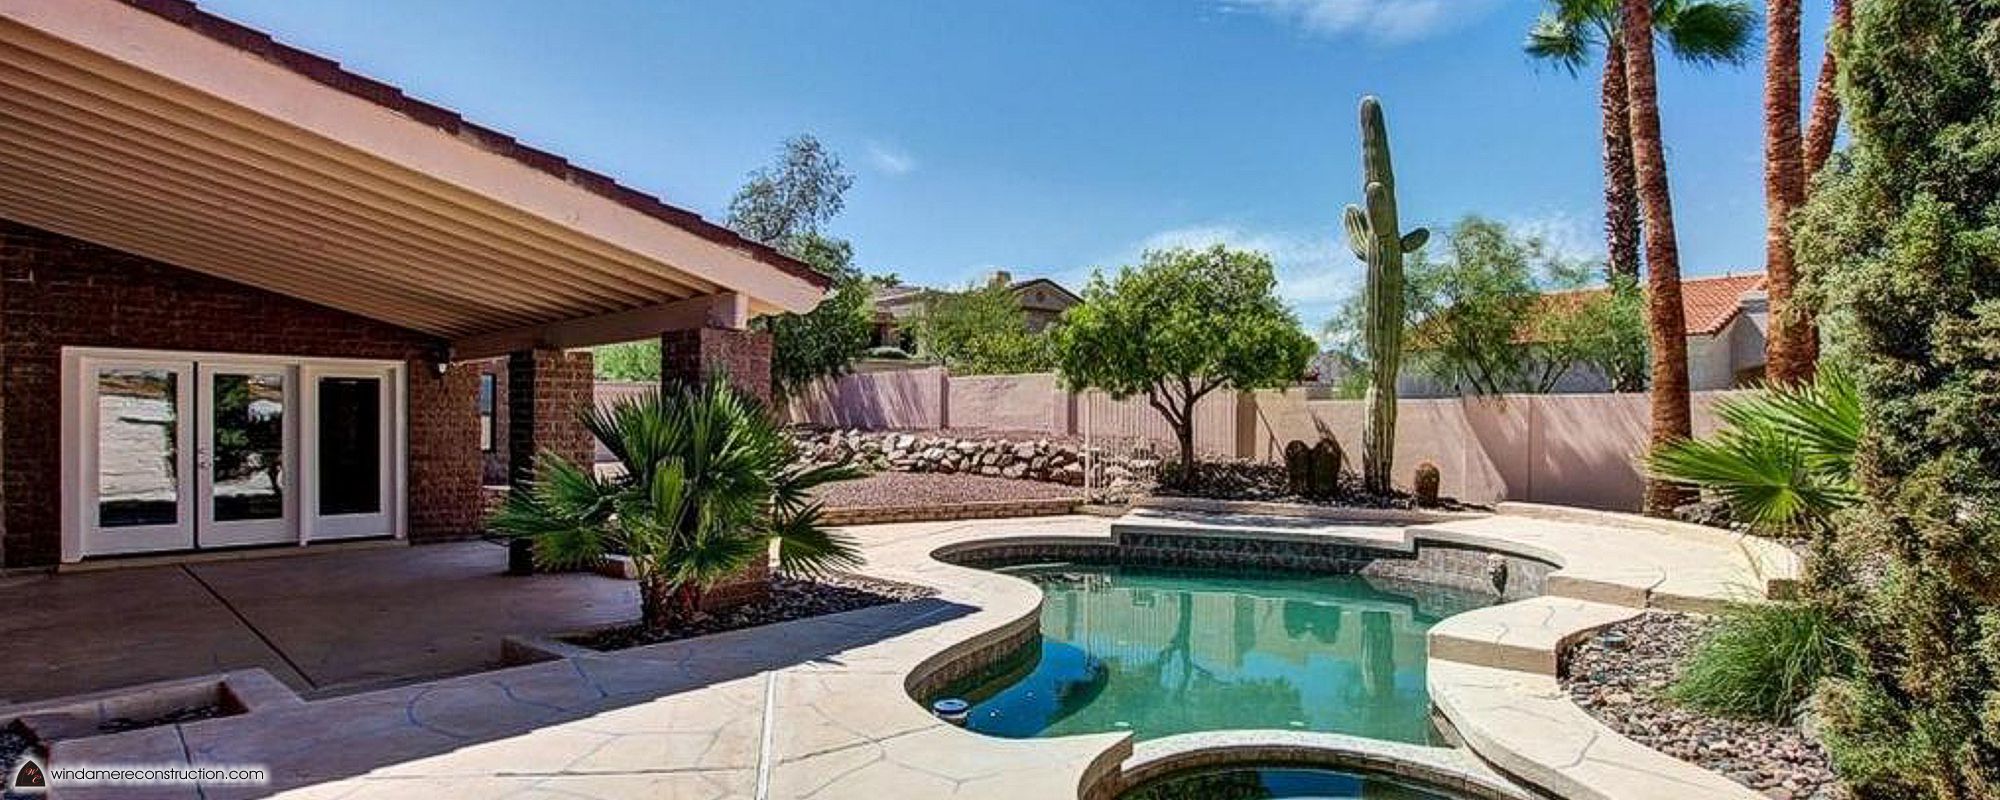 Custom Residential Home Construction for the Outdoor Arizona Lifestyle